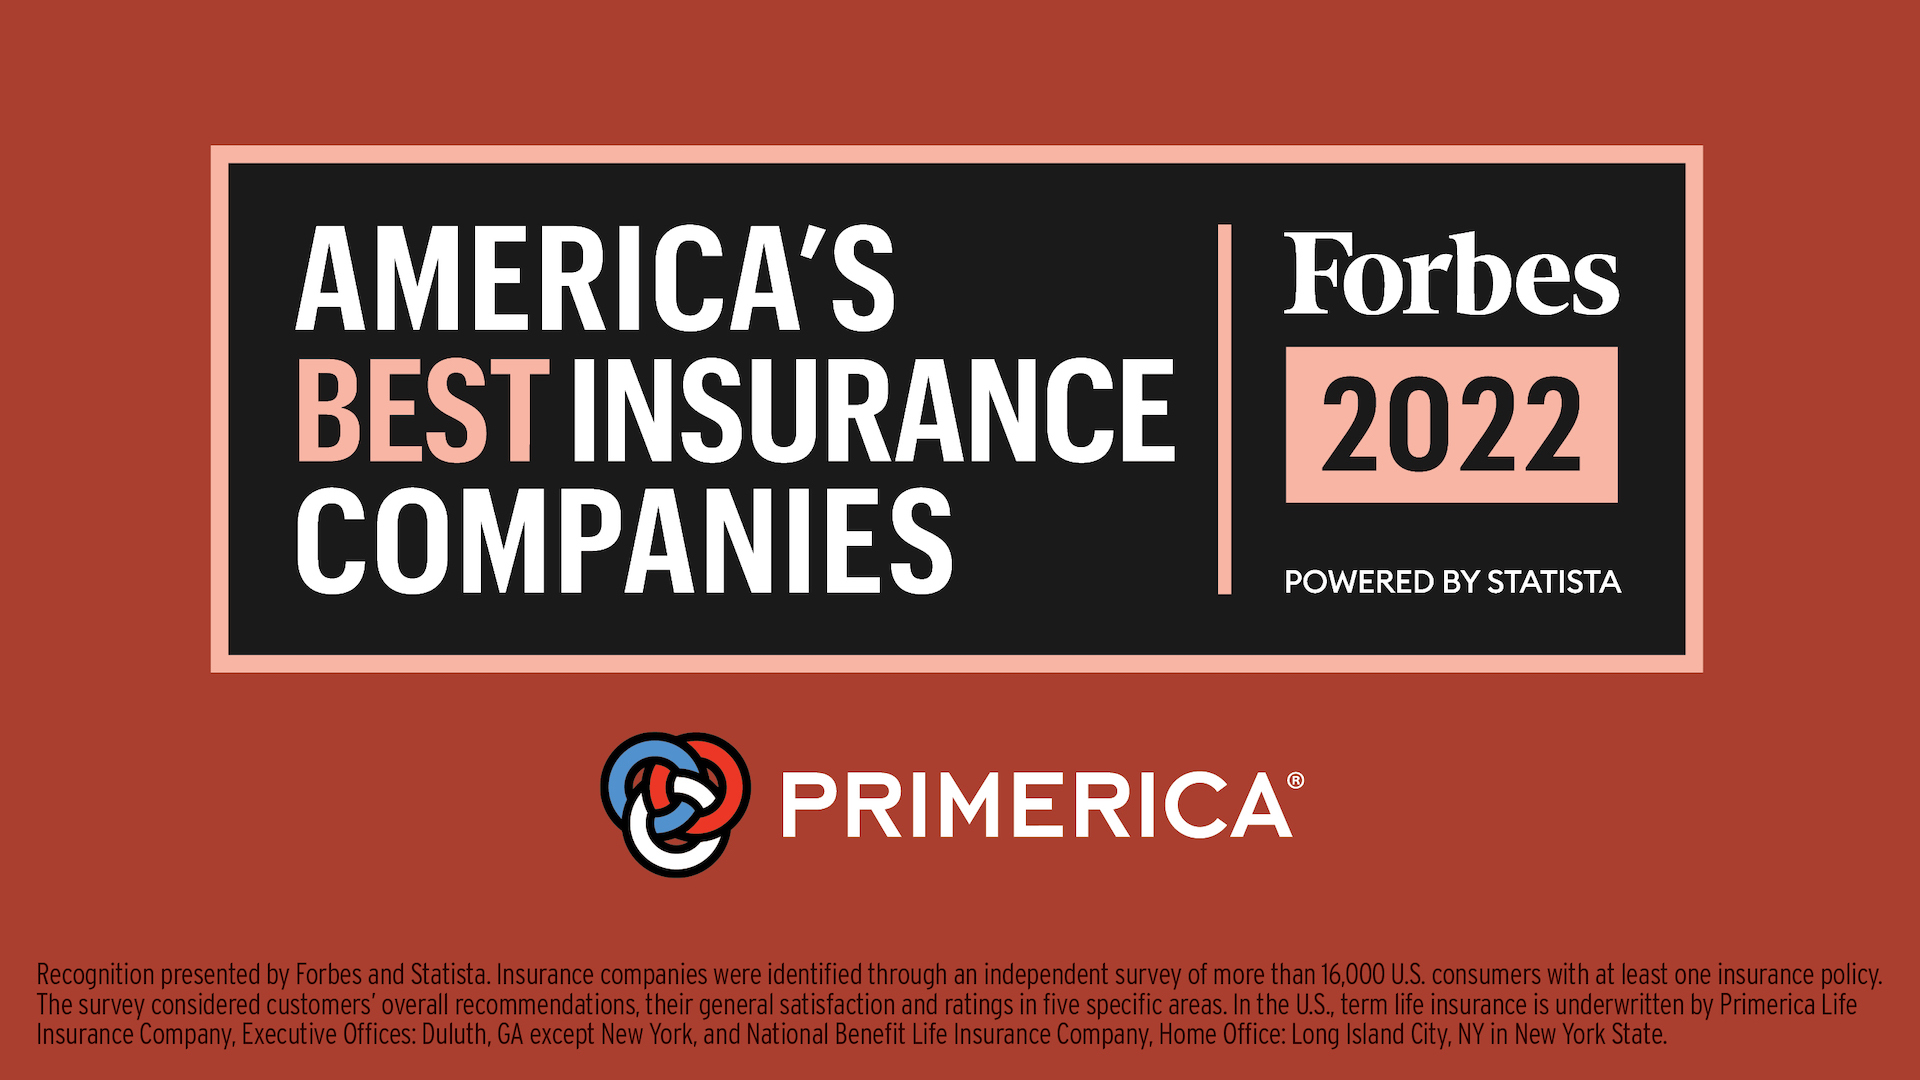 Primerica Named One of America’s Best Insurance Companies for 2022 by